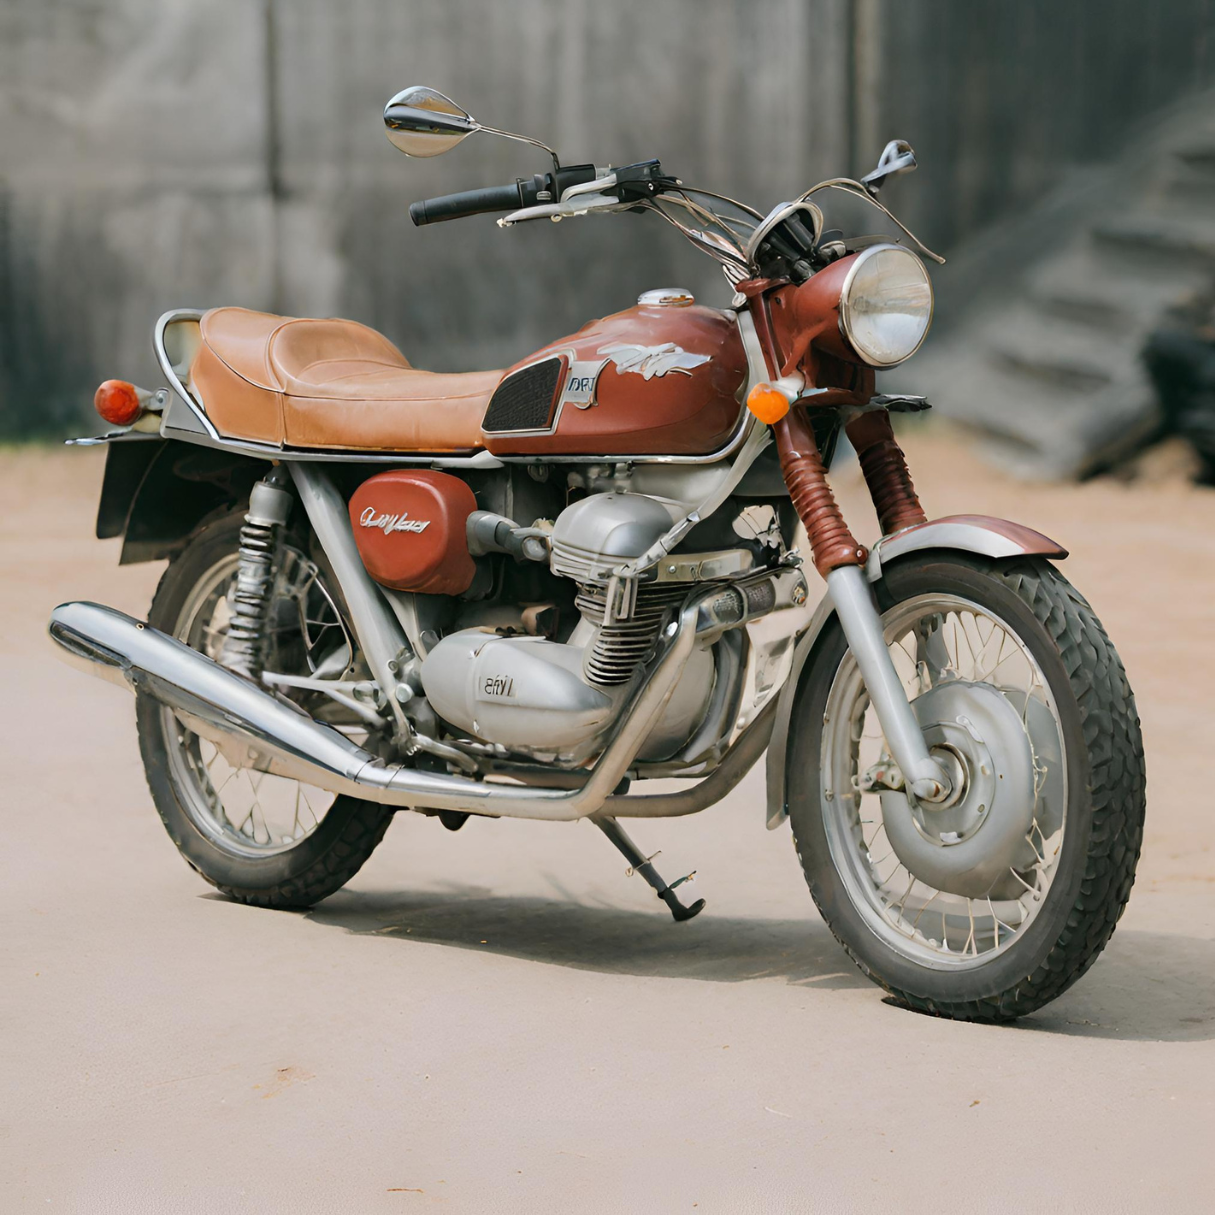 A reliable motorcycle parked on a dirt road.